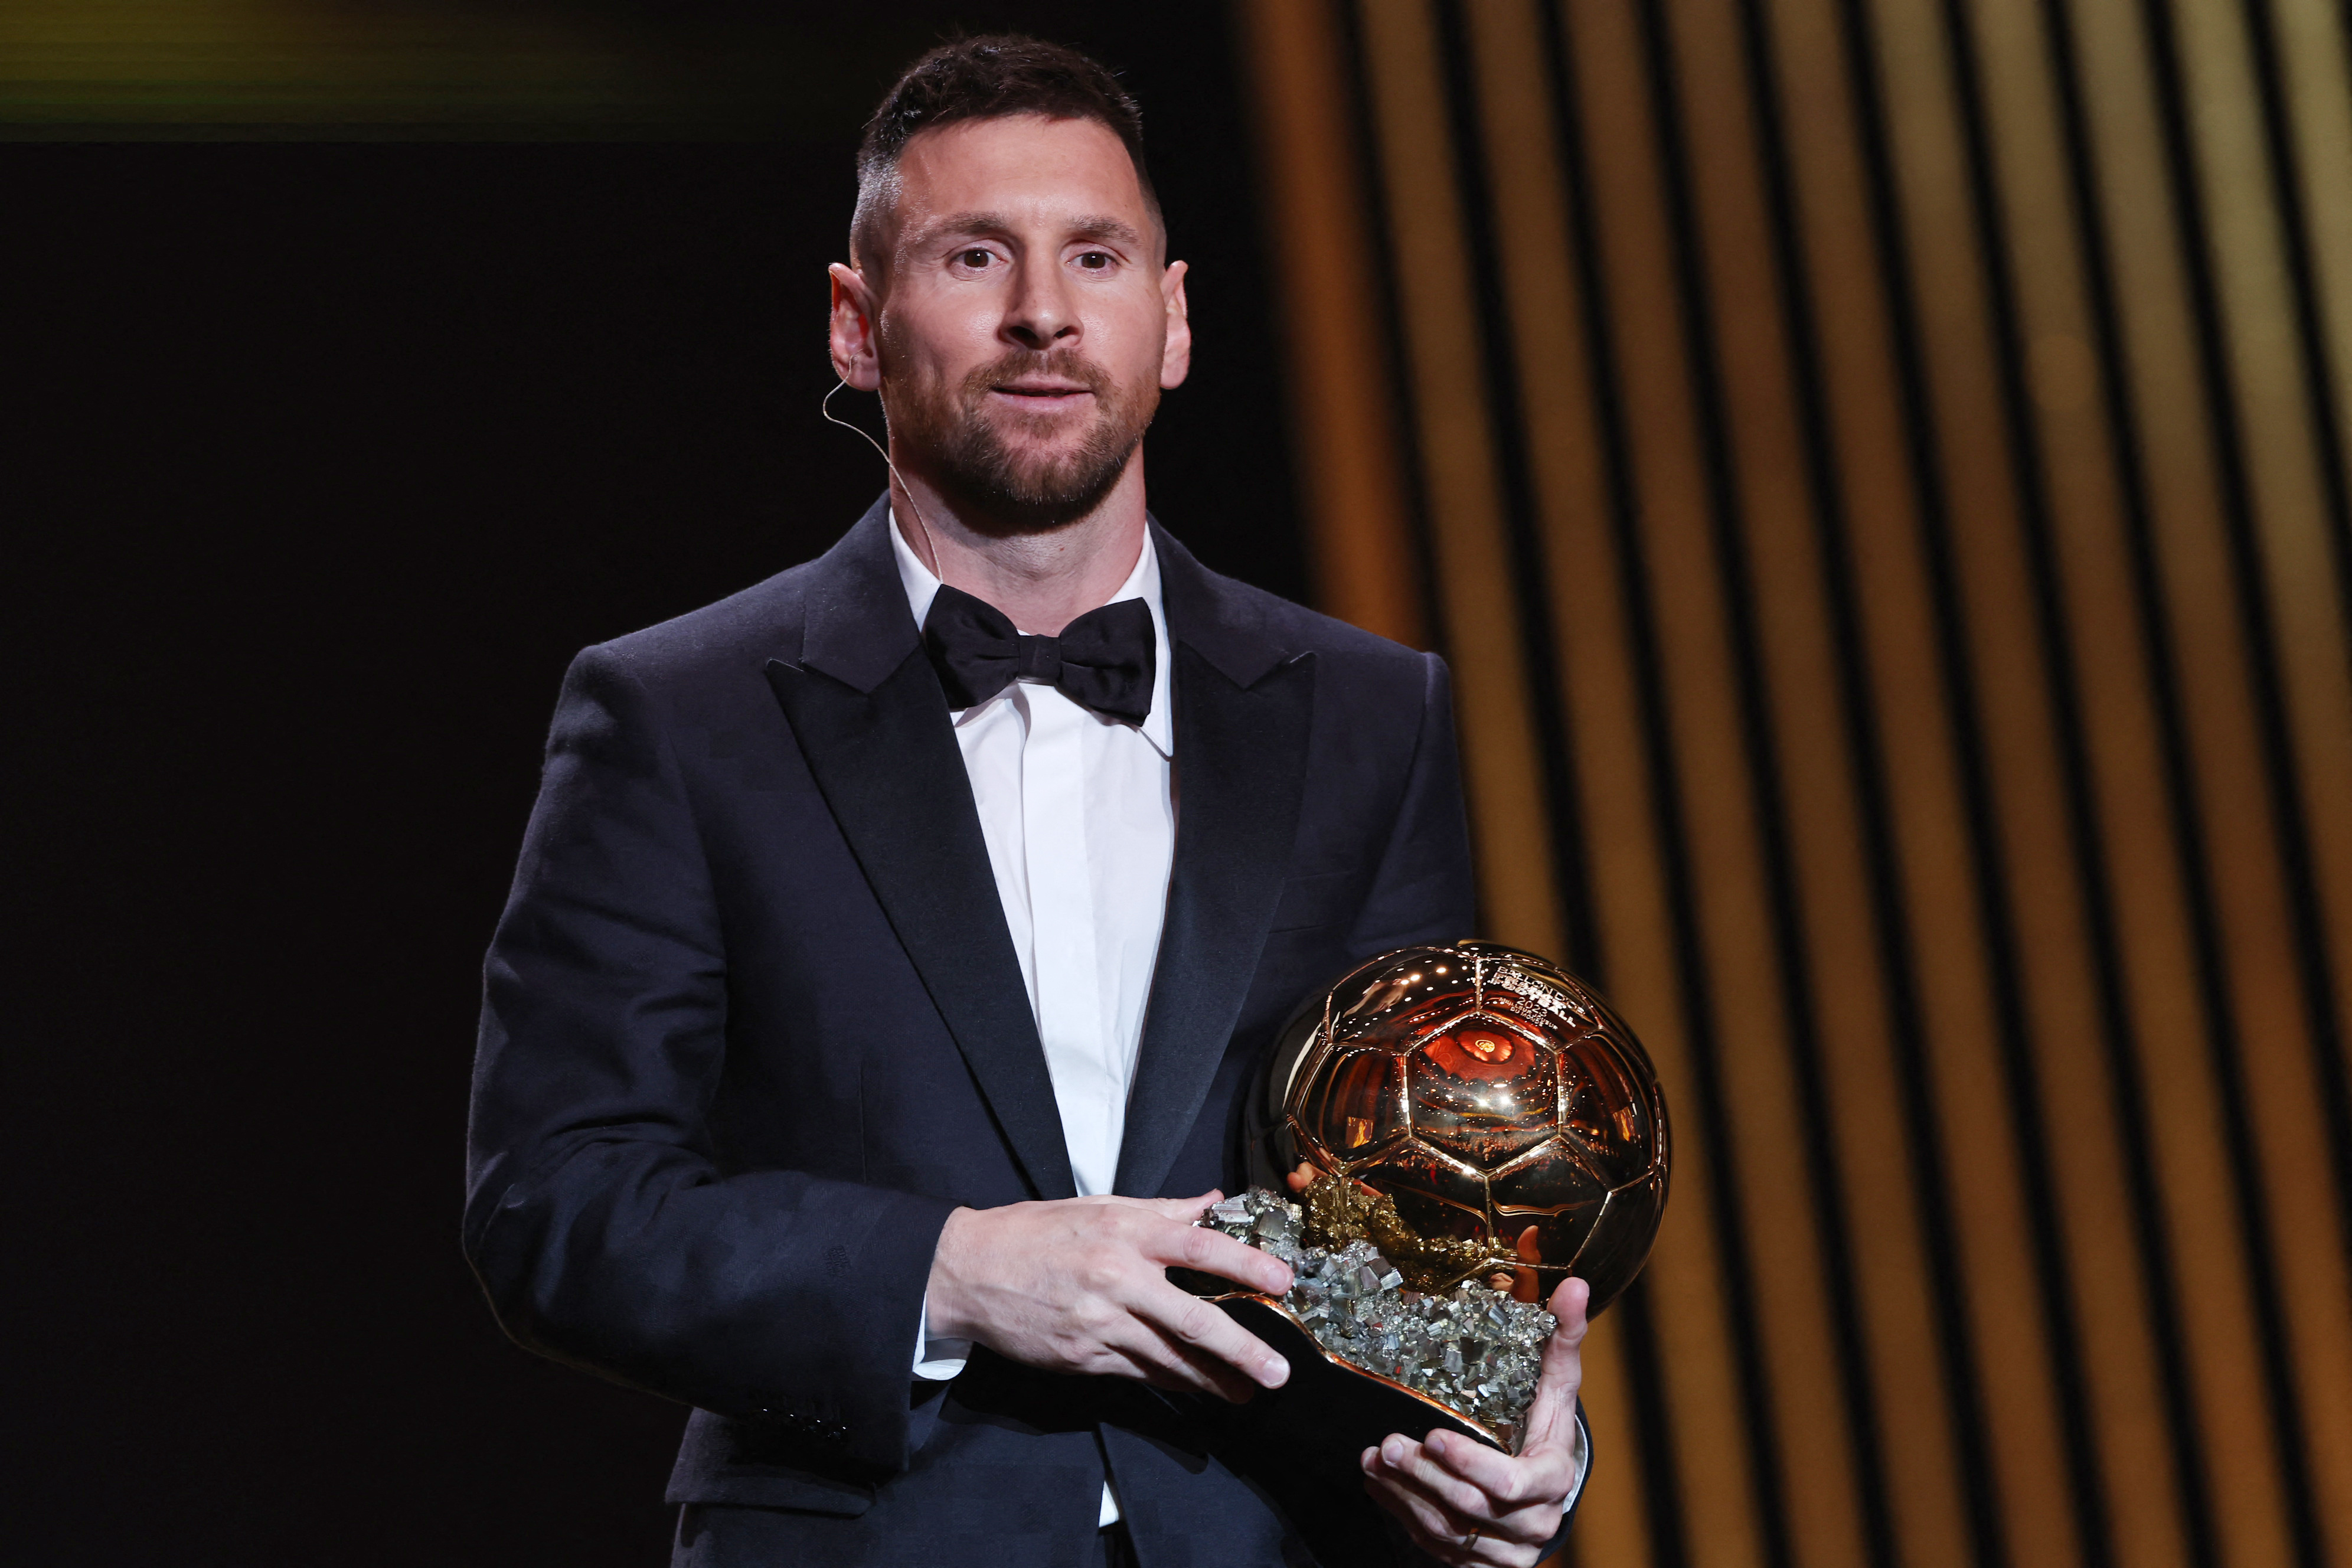 Defining the 30 Best Players in the World Using One Word